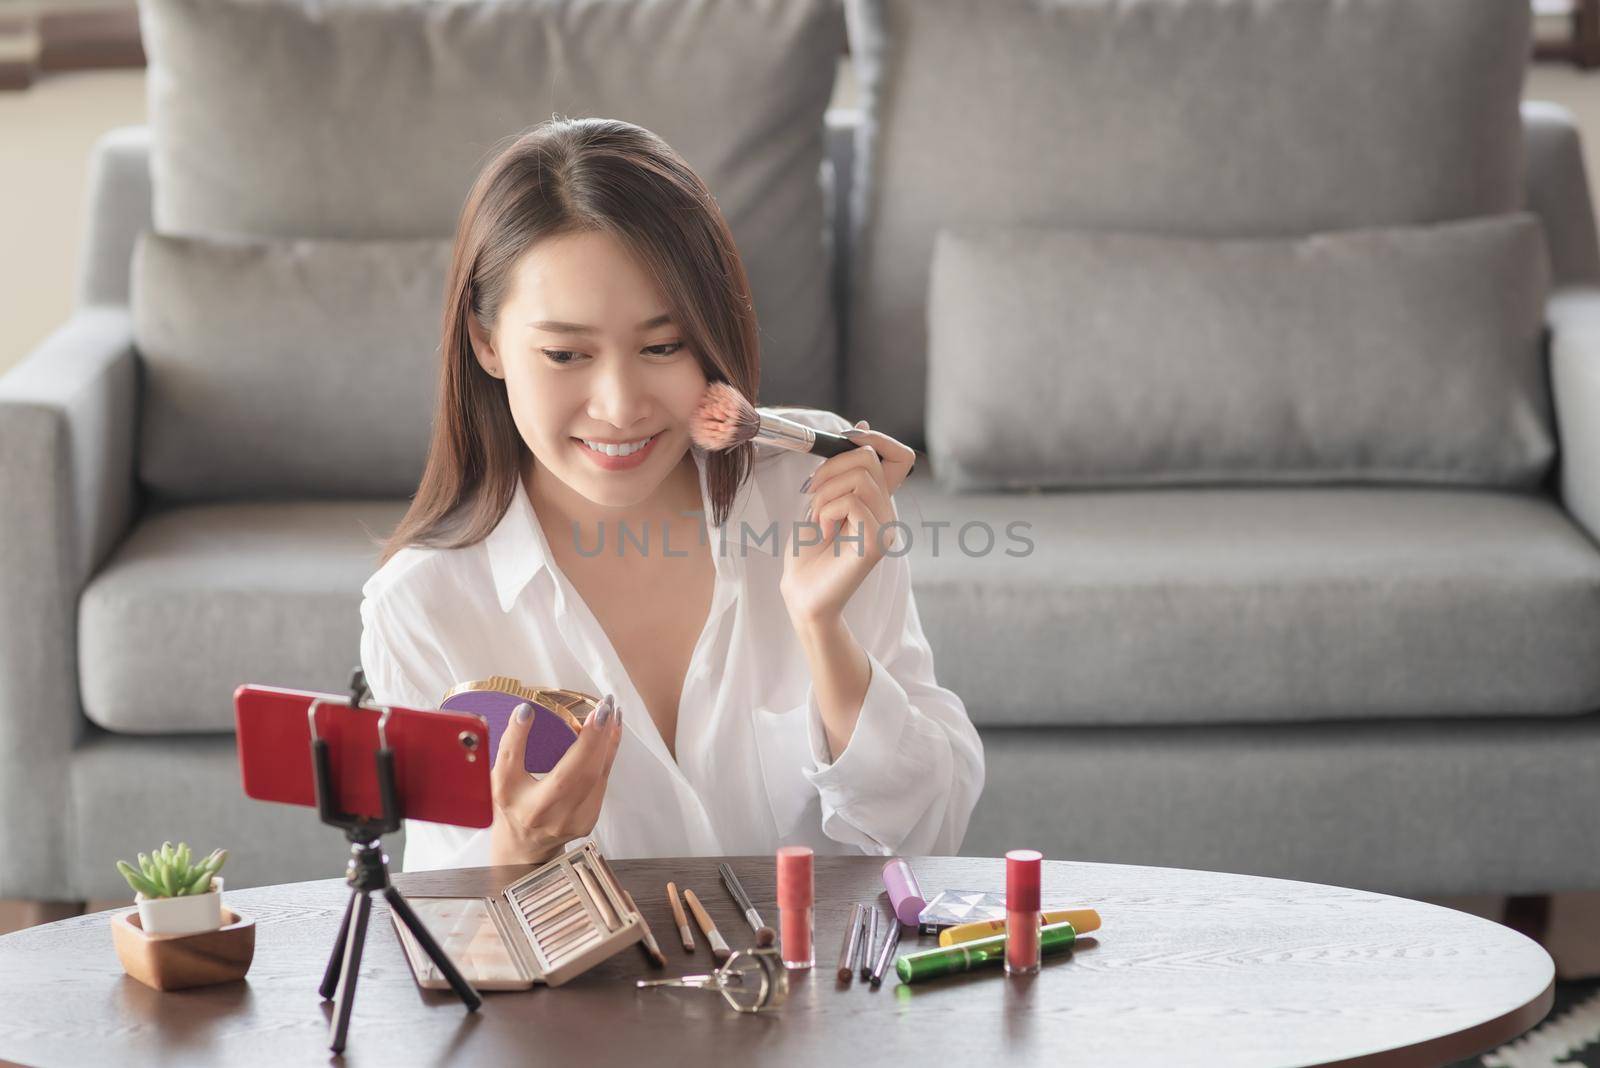 Young female beauty influencer making a video tutorial for her beauty channel on cosmetics during stay safe at home